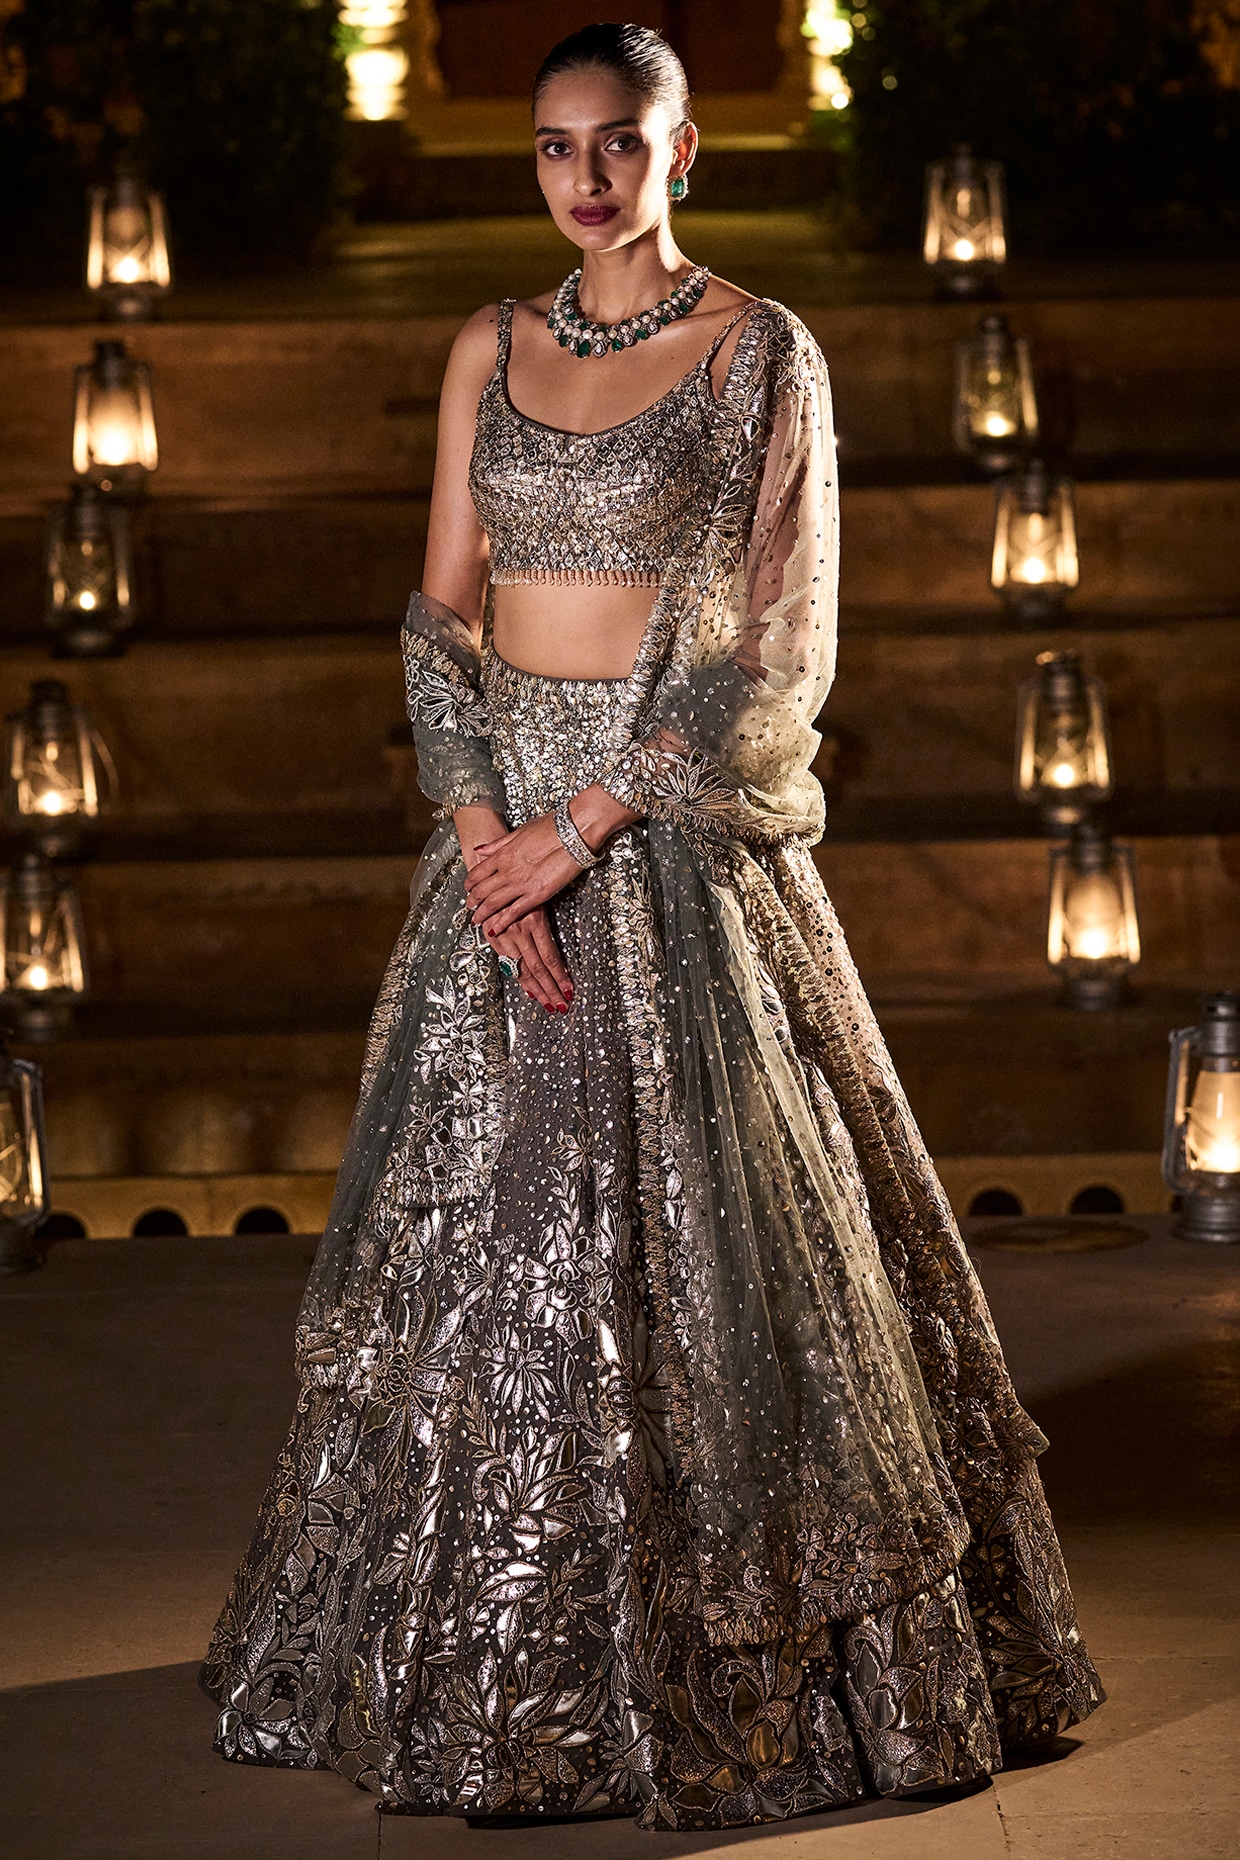 A pleated classic lehenga crafted from georgette base fabric, adorned with  delicate gold and silver leather